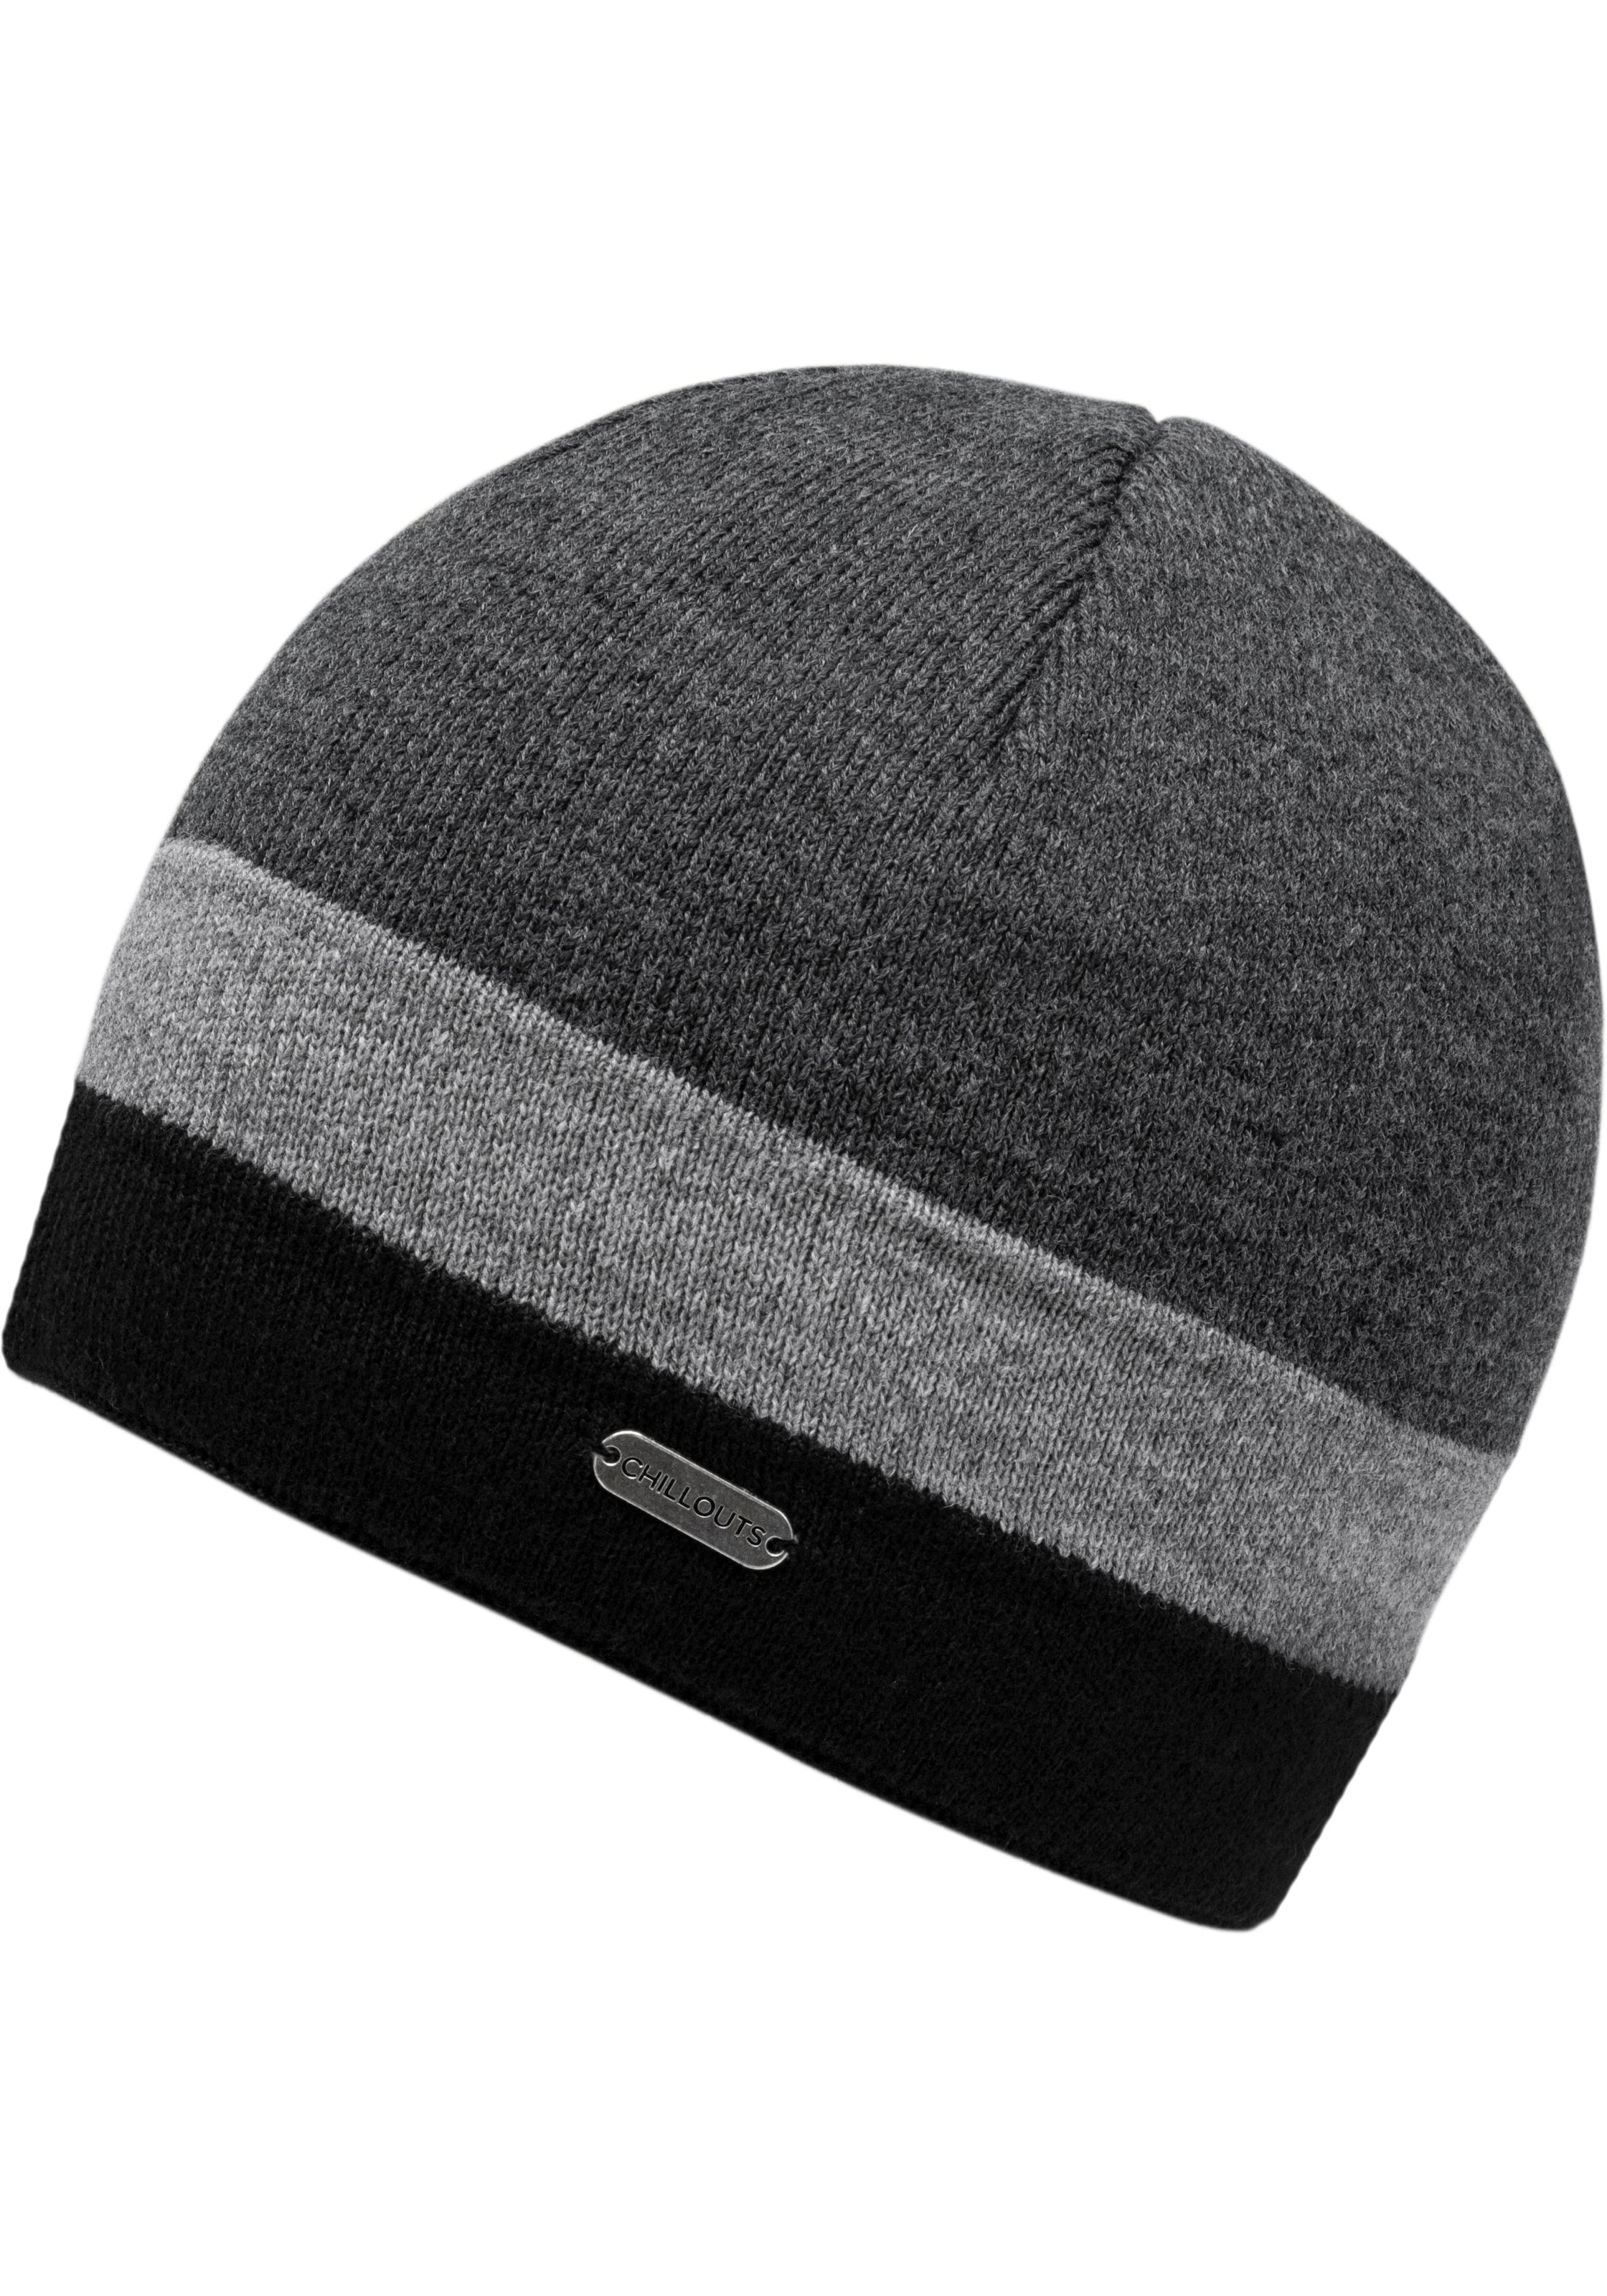 Johnny Hat Beanie Hat«, kaufen »Johnny chillouts UNIVERSAL | online